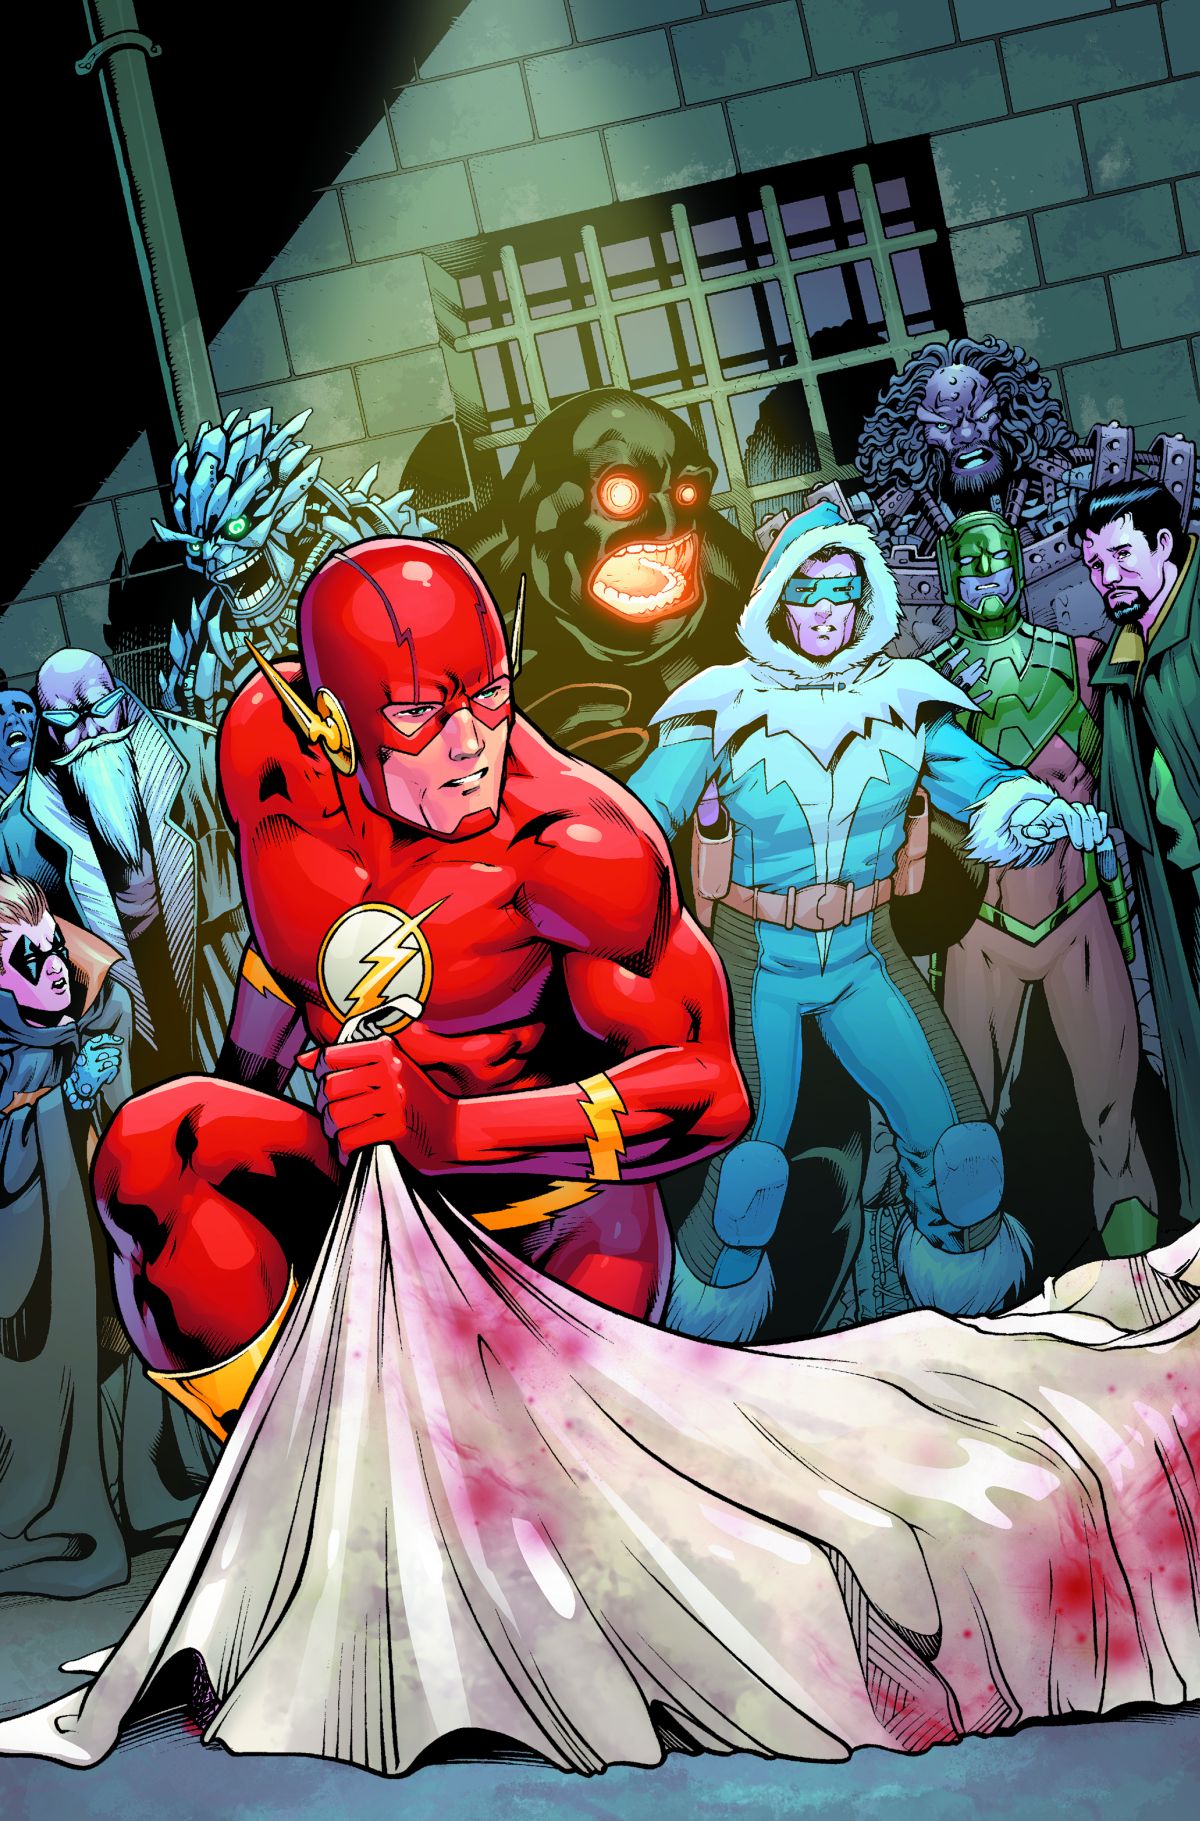 THE FLASH VOL. 6: A COLD DAY IN HELL TP